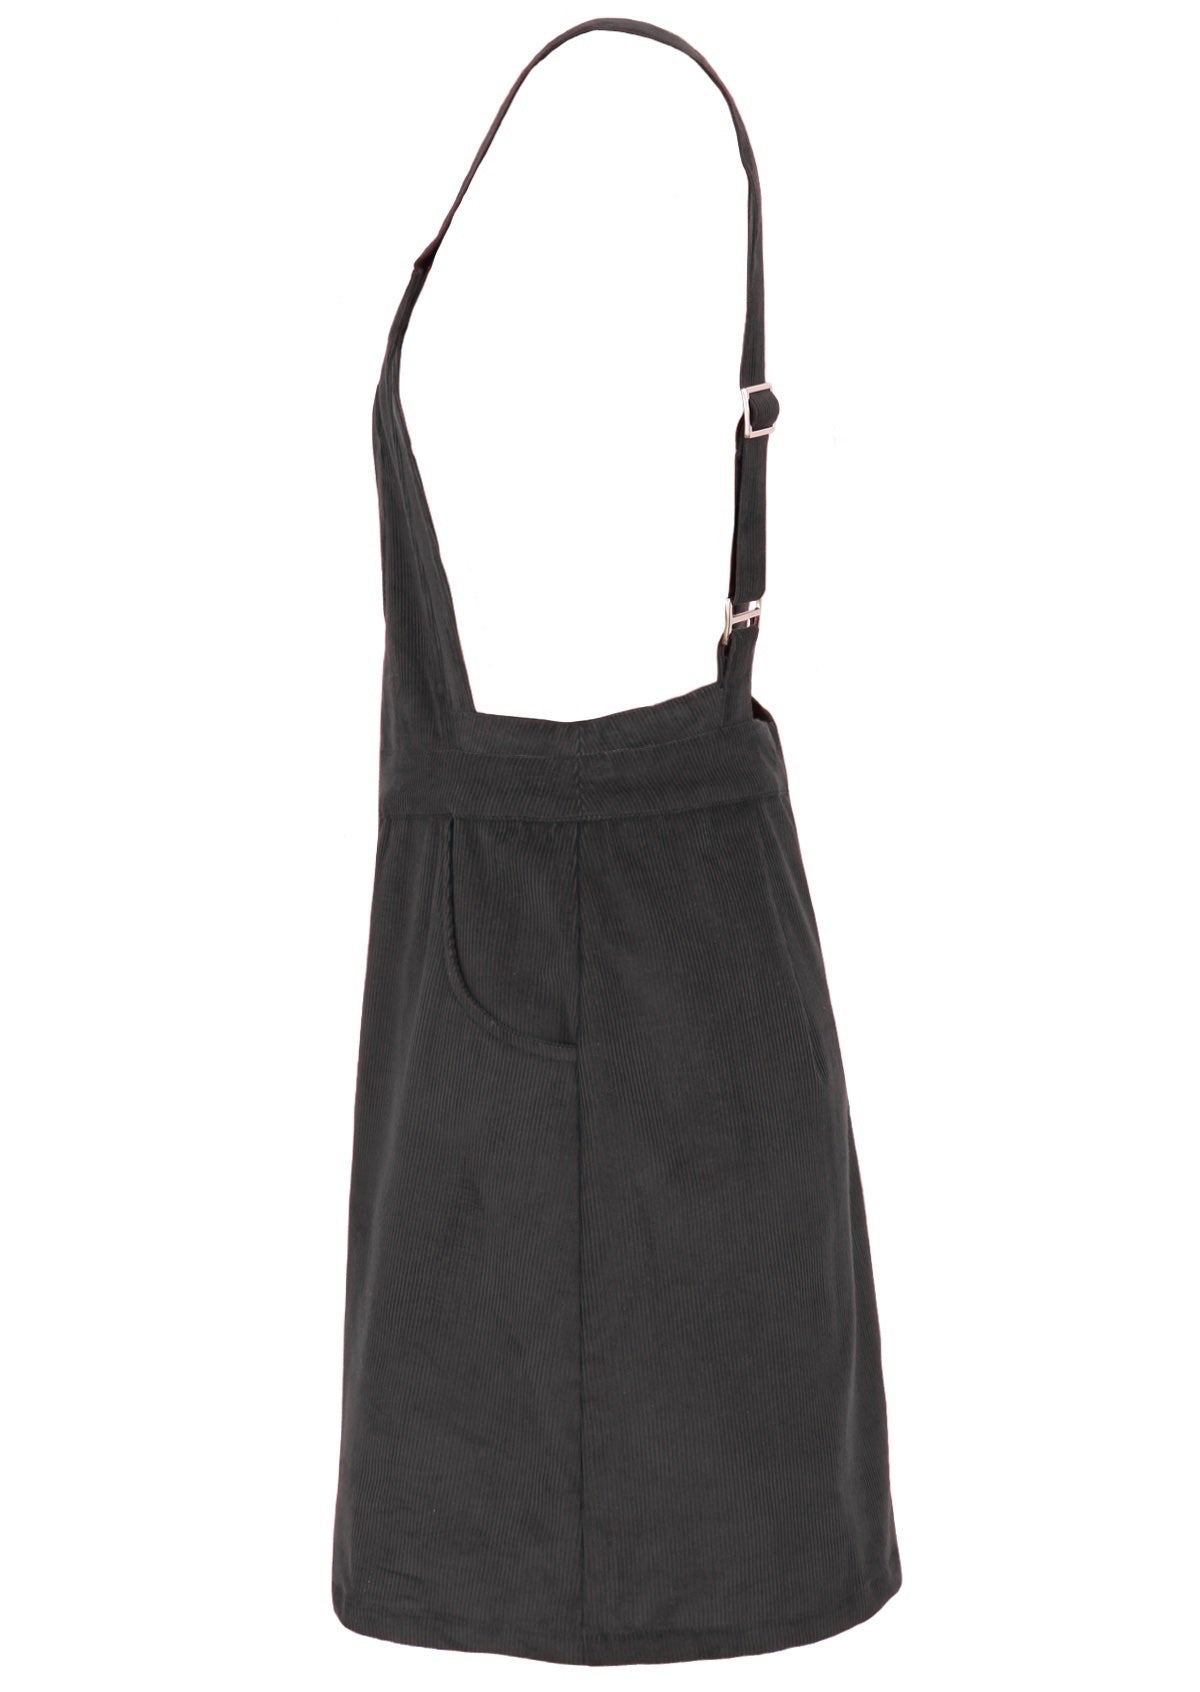 100% cotton corduroy pinafore has adjustable straps for the perfect fit. 